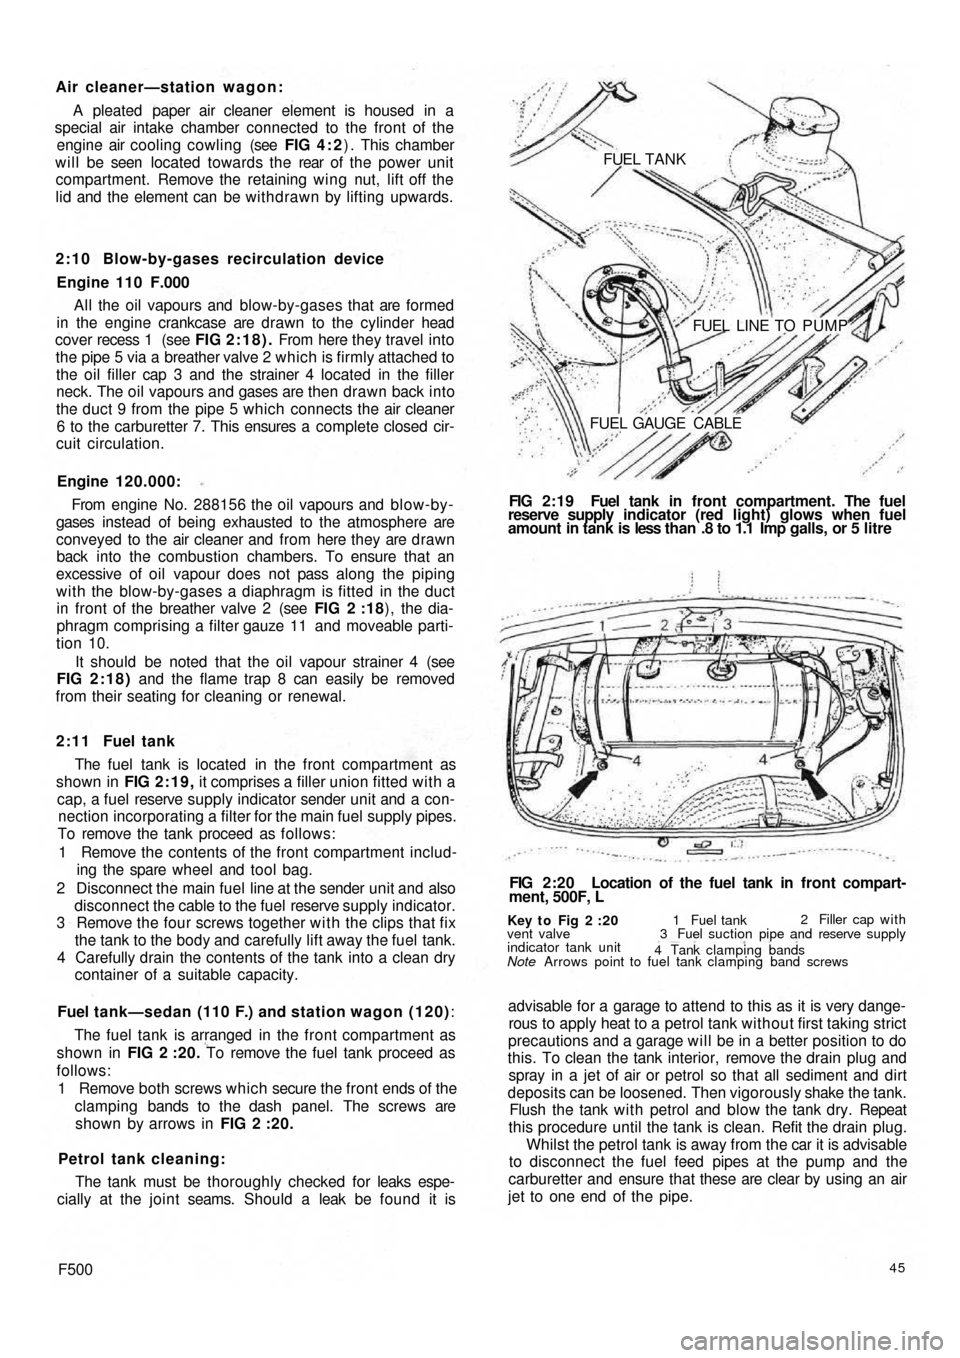 FIAT 500 1969 1.G Owners Guide Air cleaner—station wagon:
A pleated paper air cleaner element is housed  in a
special air intake chamber connected to the front of the
engine air cooling cowling (see FIG 4 : 2) . This chamber
will